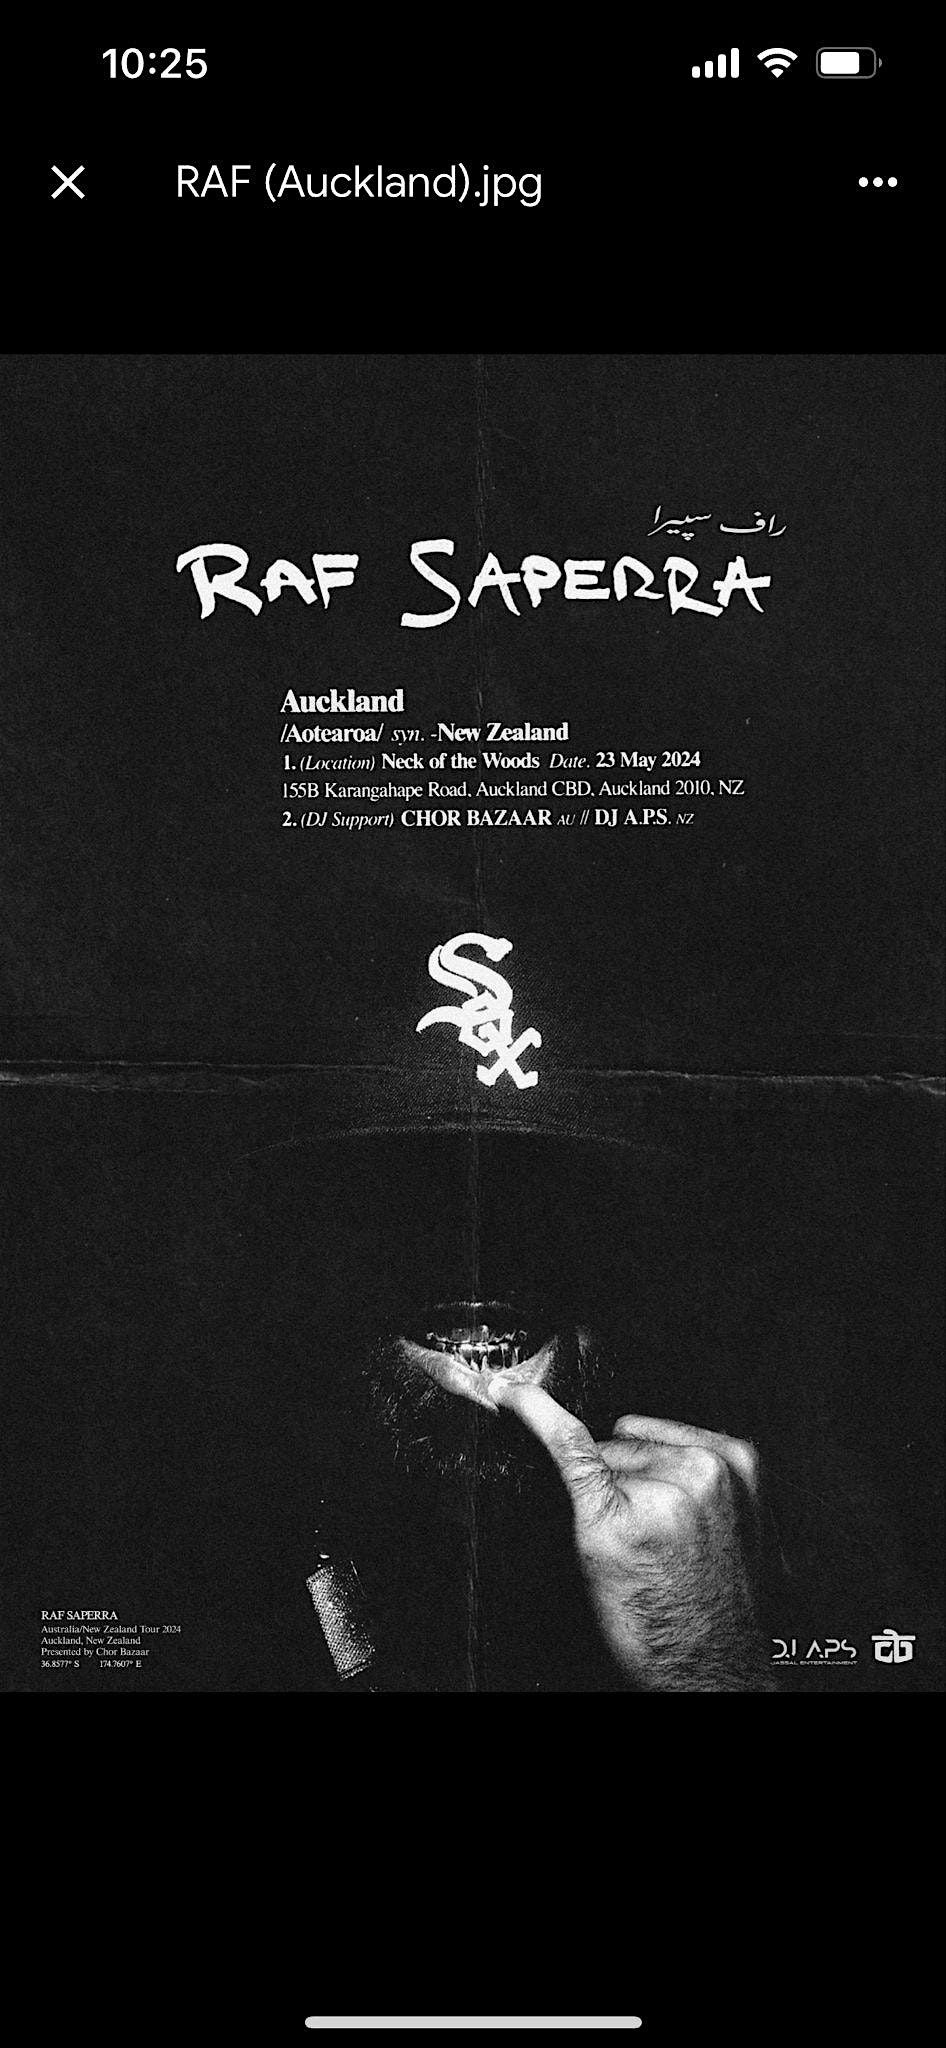 Raf-Saperra Live In Auckland